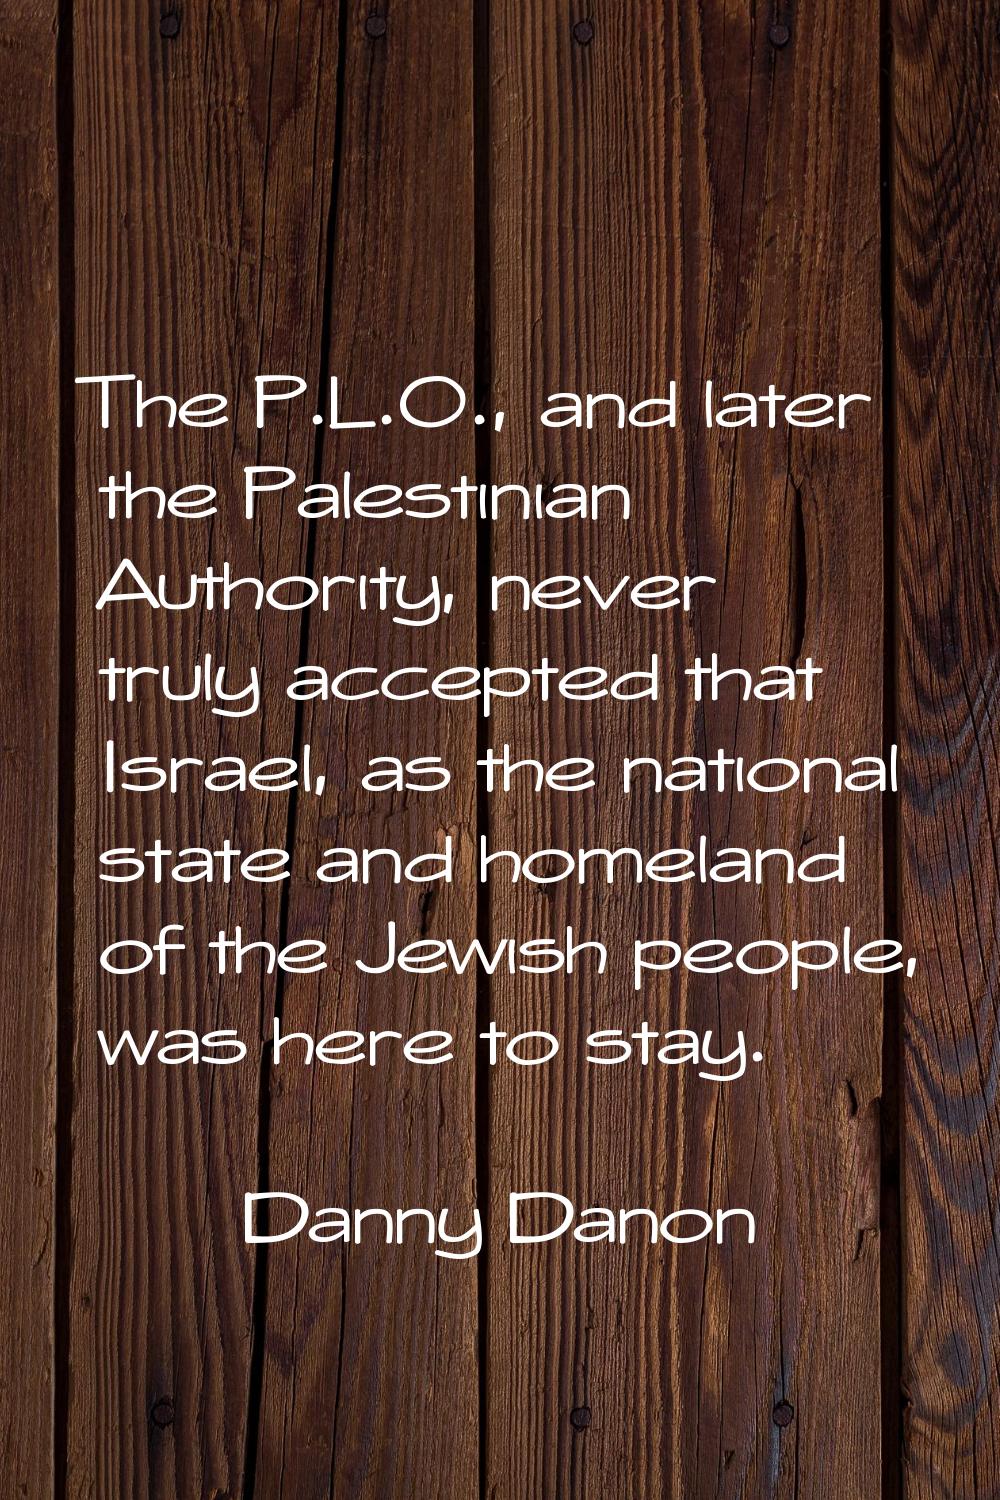 The P.L.O., and later the Palestinian Authority, never truly accepted that Israel, as the national 